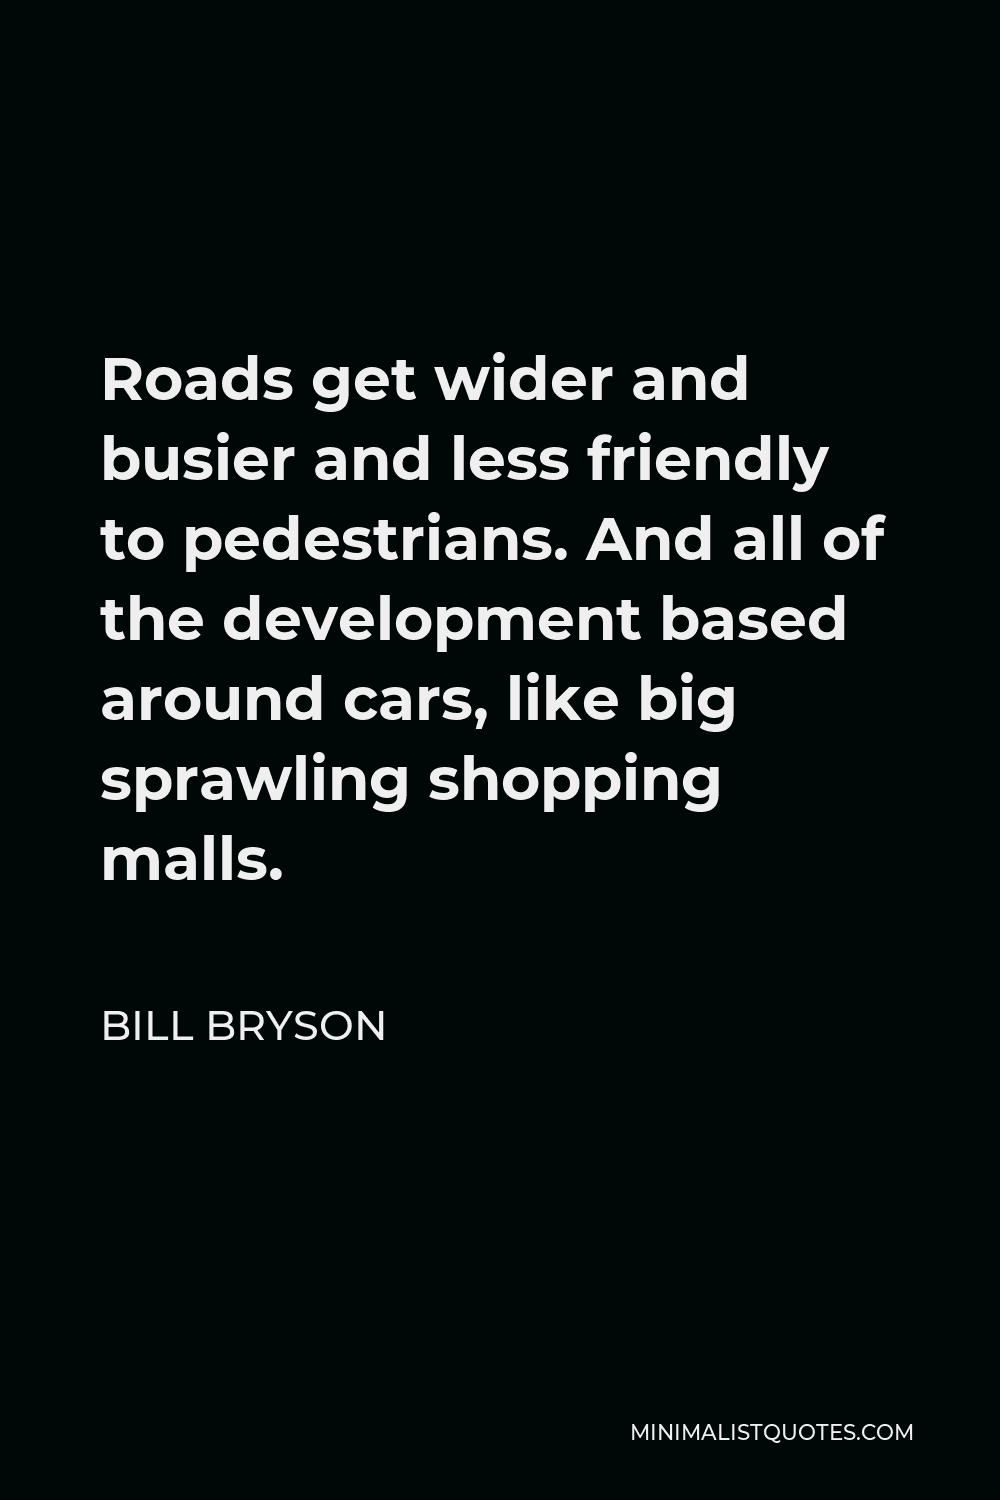 Bill Bryson Quote - Roads get wider and busier and less friendly to pedestrians. And all of the development based around cars, like big sprawling shopping malls.